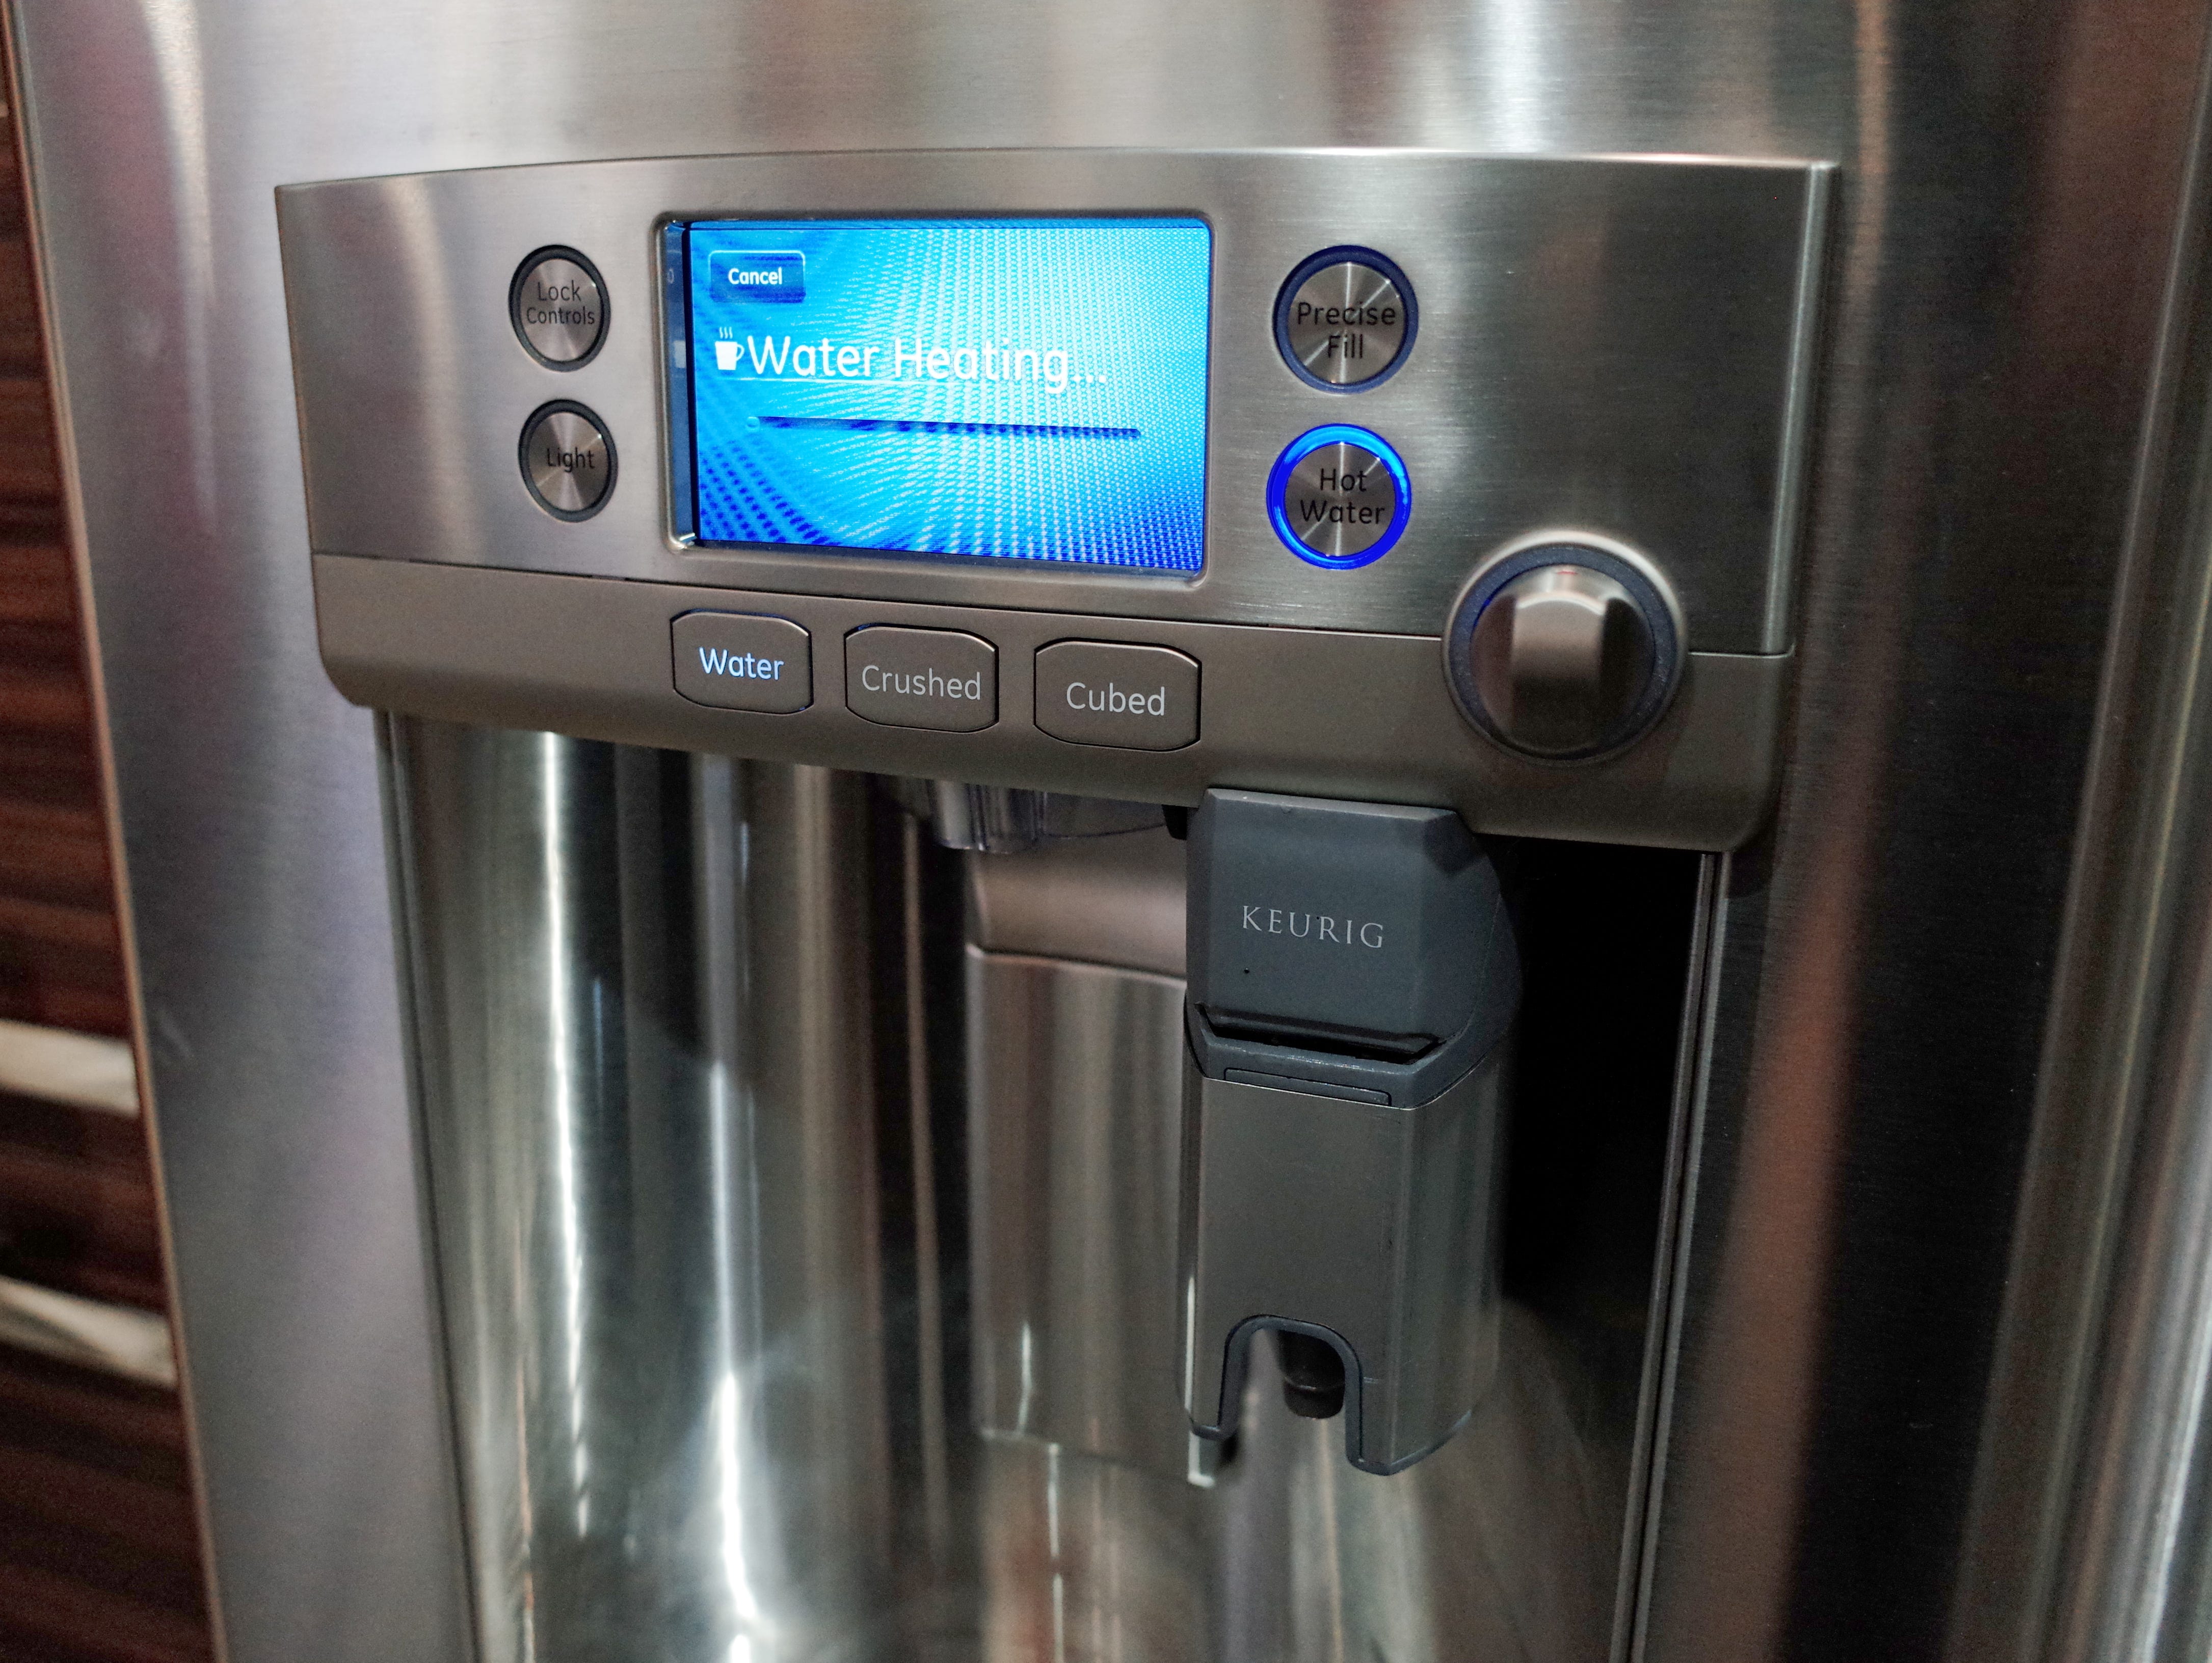 Did you know some fridges feature built-in Keurig machines?